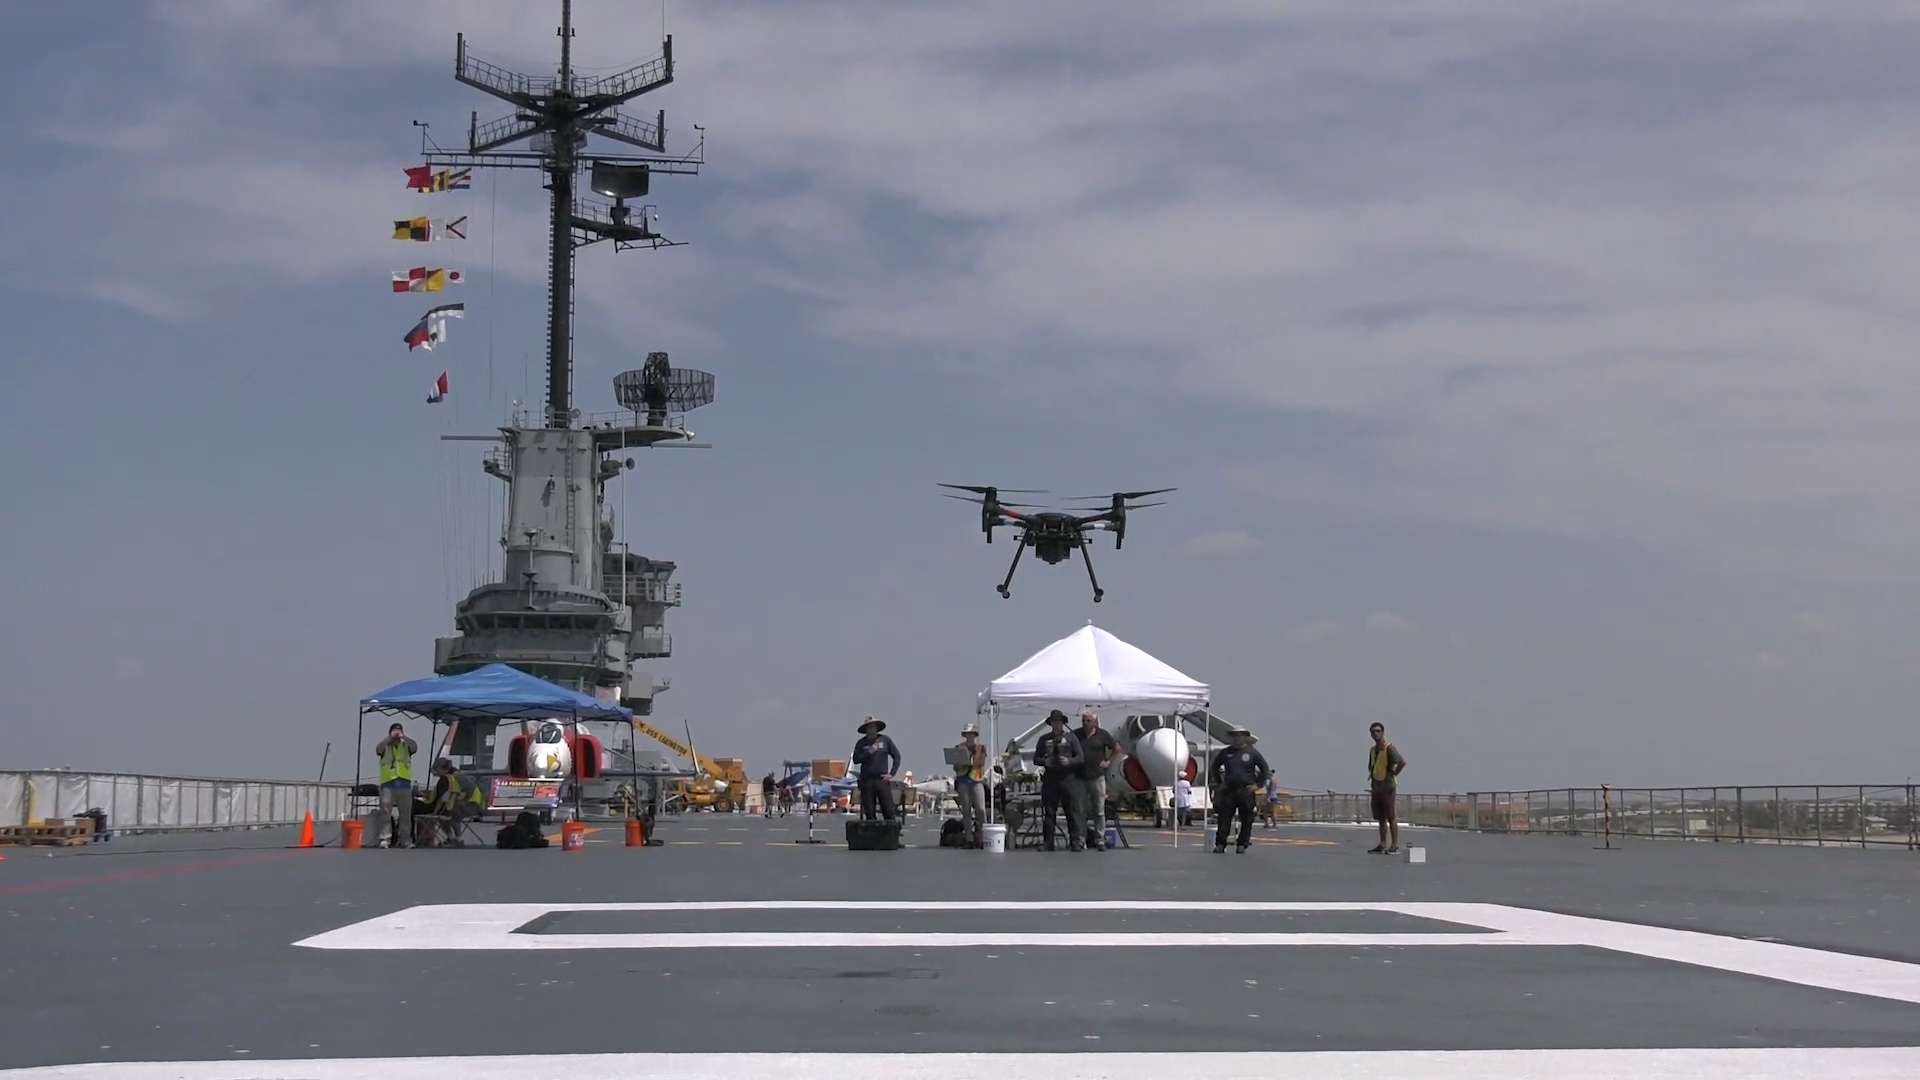 The retired USS Lexington aircraft carrier was one of the sites NASA researchers demonstrated UAS.